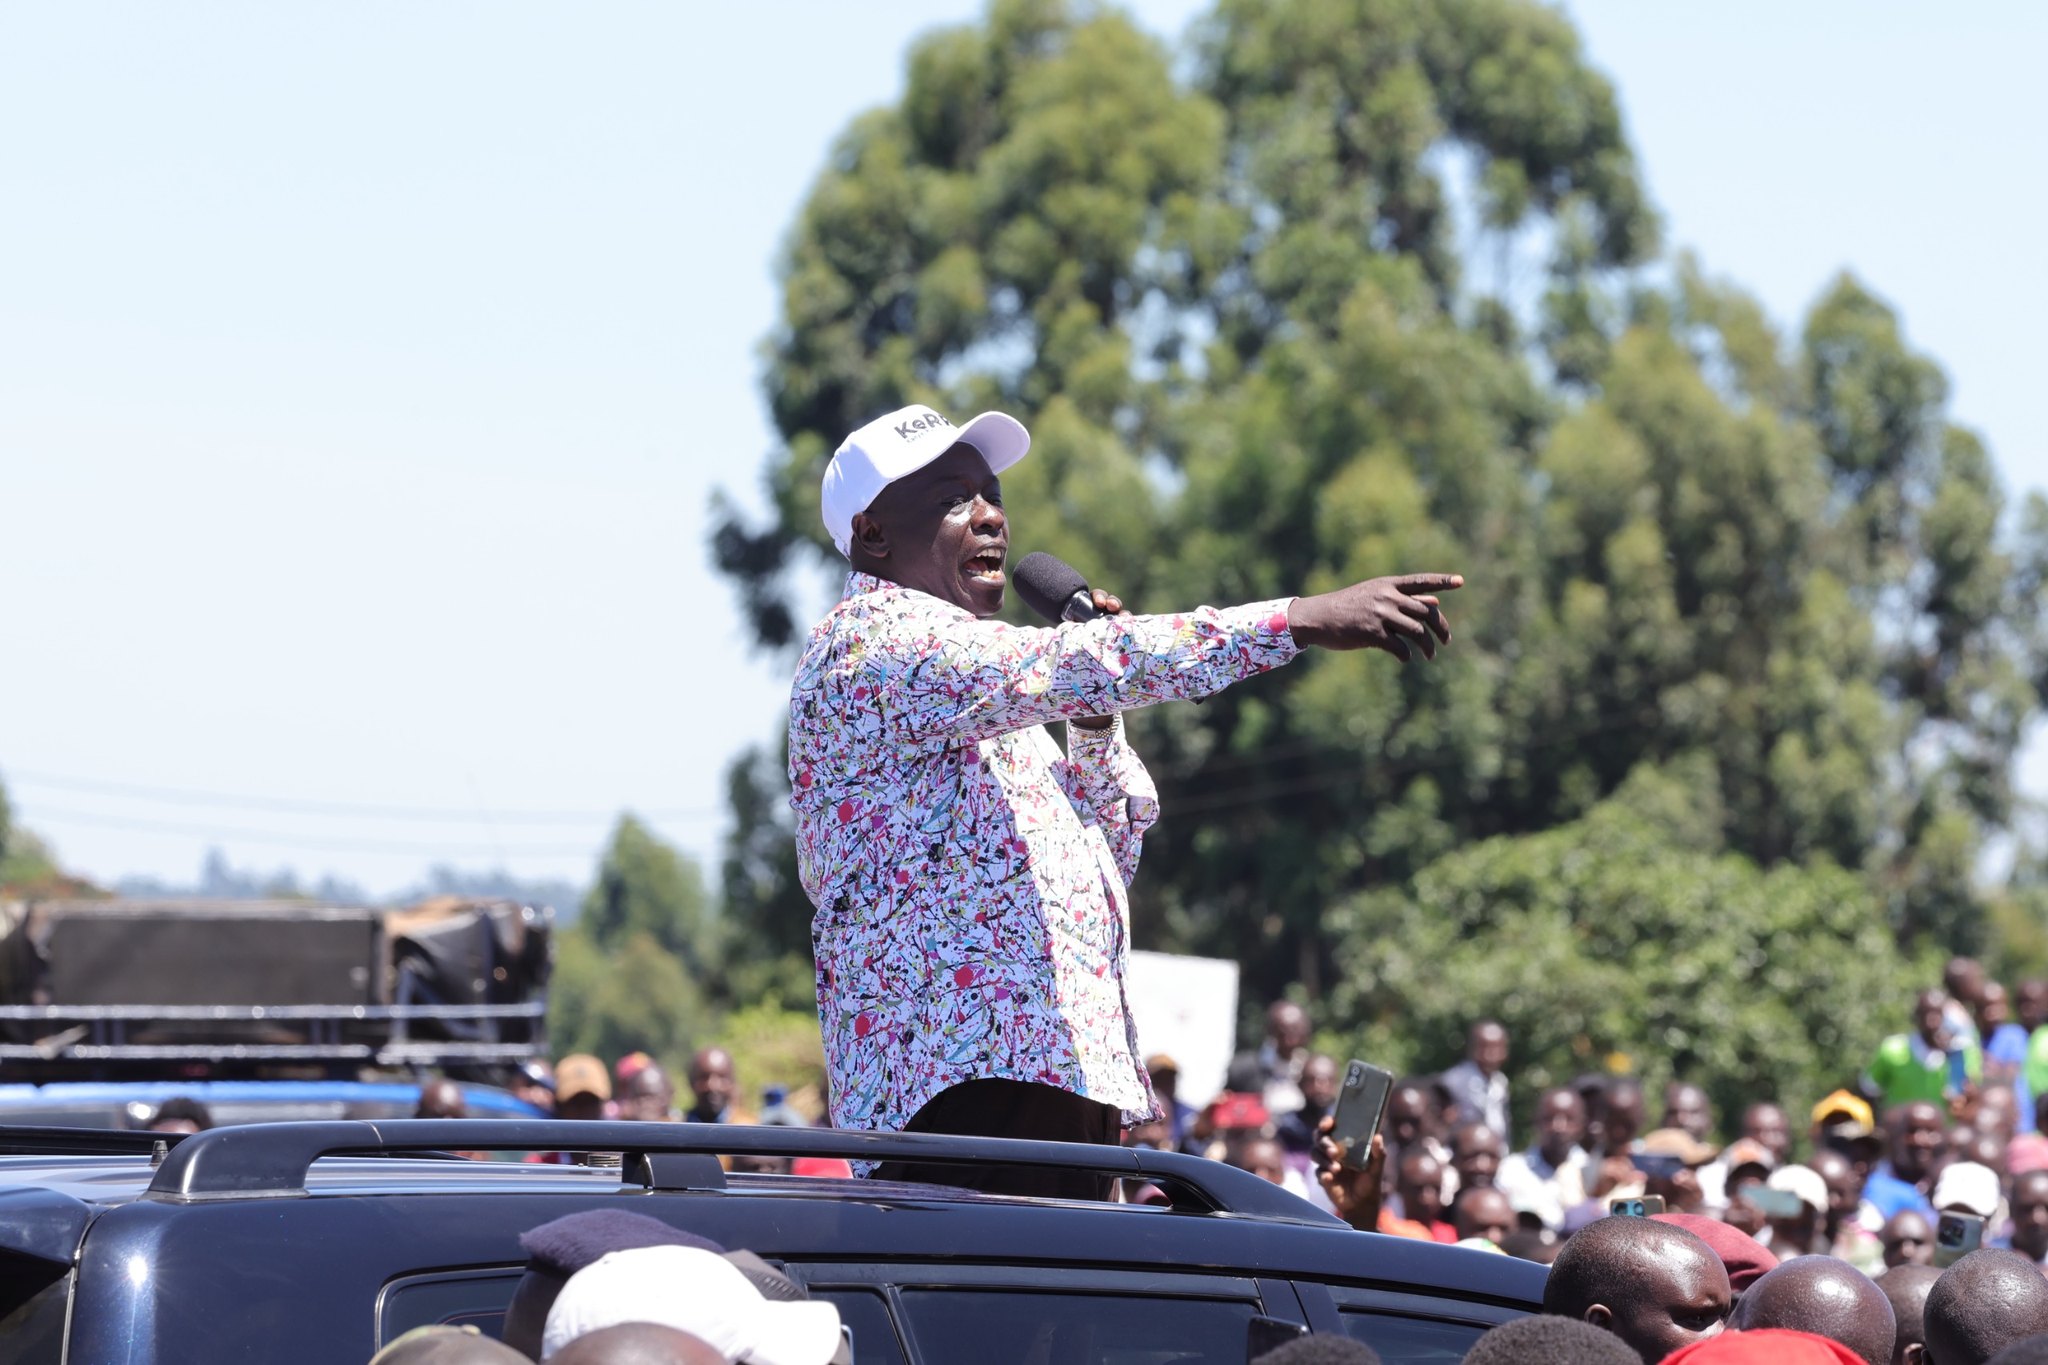 Gachagua Affirms Loyalty, Commitment to President Ruto During Kericho Visit